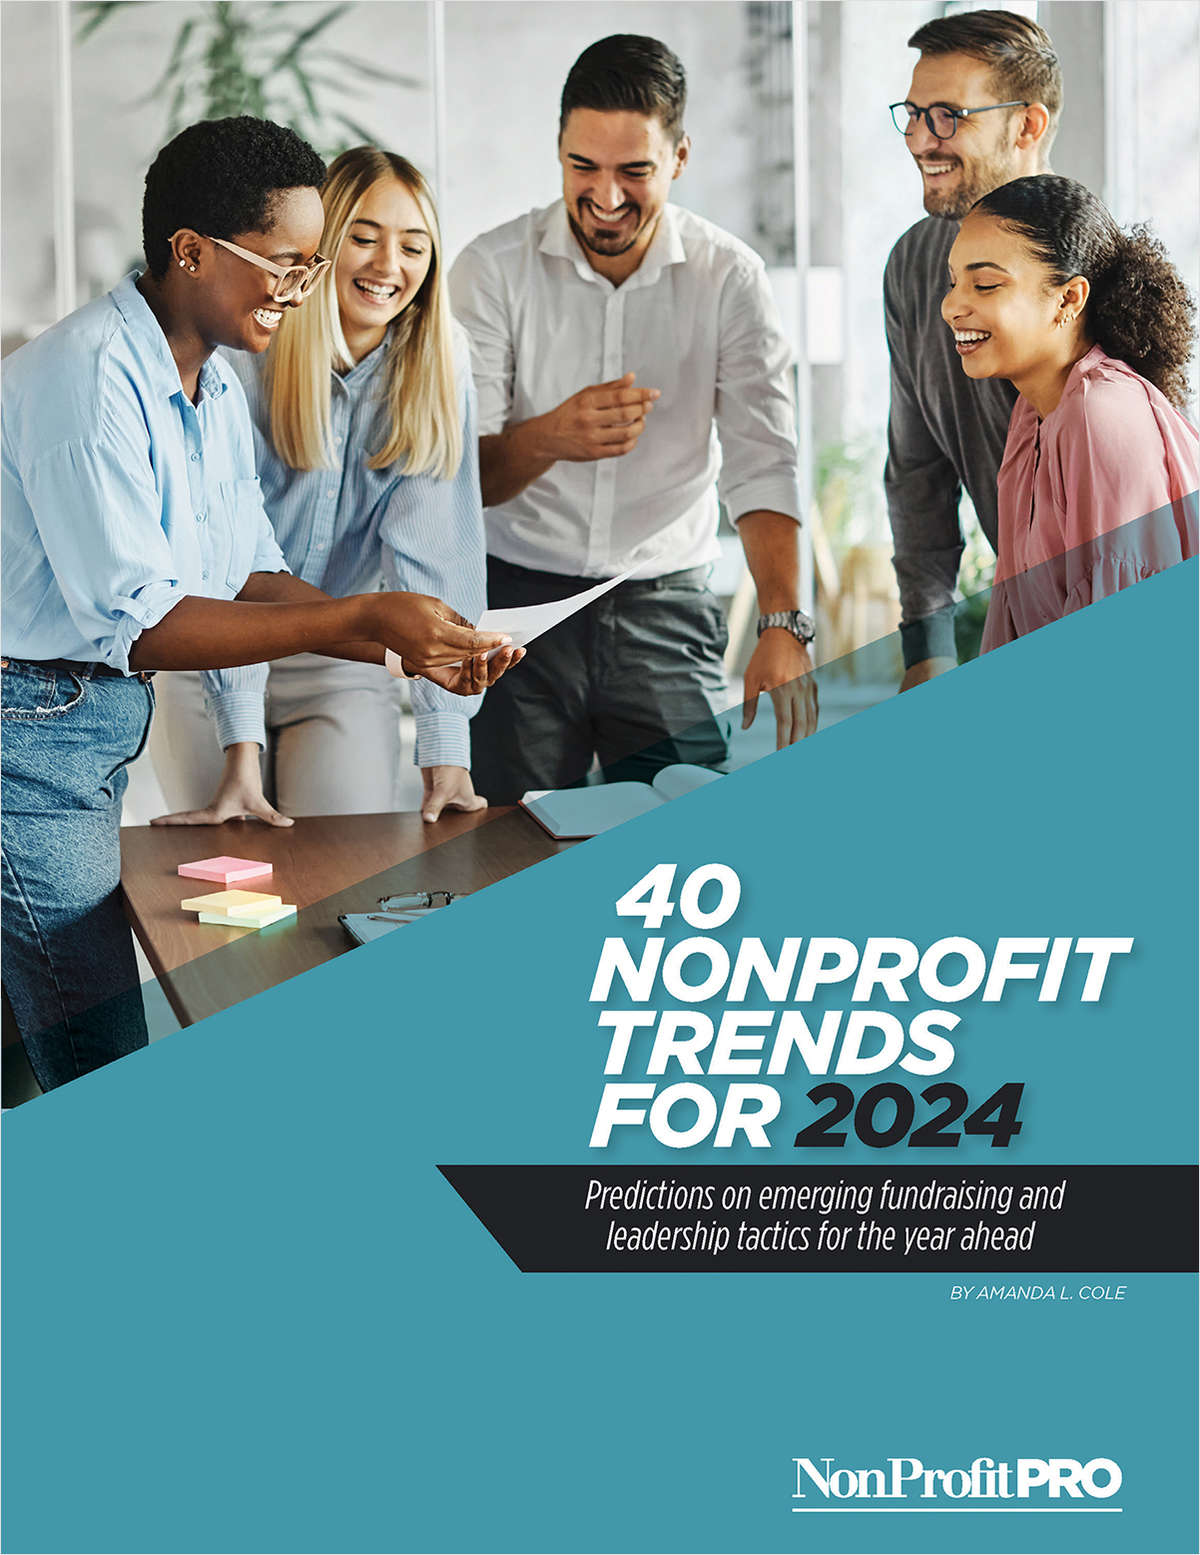 40 Nonprofit Trends for 2024